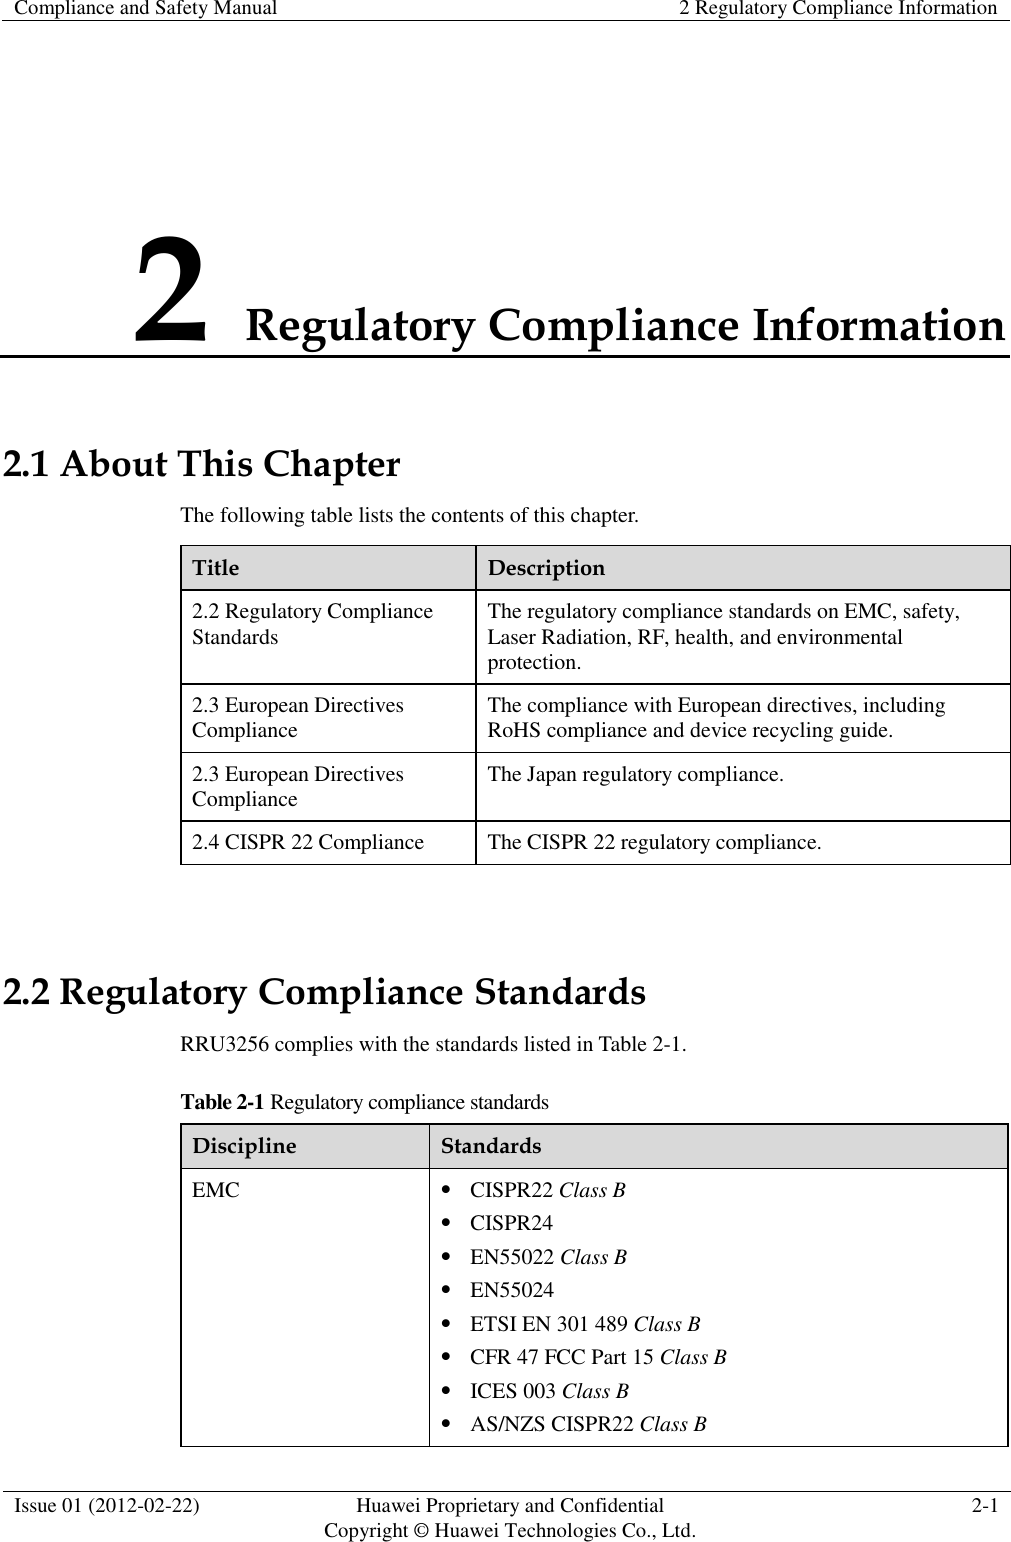 Compliance and Safety Manual 2 Regulatory Compliance Information  Issue 01 (2012-02-22) Huawei Proprietary and Confidential           Copyright © Huawei Technologies Co., Ltd. 2-1  2 Regulatory Compliance Information 2.1 About This Chapter The following table lists the contents of this chapter. Title Description 2.2 Regulatory Compliance Standards The regulatory compliance standards on EMC, safety, Laser Radiation, RF, health, and environmental protection. 2.3 European Directives Compliance The compliance with European directives, including RoHS compliance and device recycling guide. 2.3 European Directives Compliance   The Japan regulatory compliance. 2.4 CISPR 22 Compliance The CISPR 22 regulatory compliance.  2.2 Regulatory Compliance Standards RRU3256 complies with the standards listed in Table 2-1. Table 2-1 Regulatory compliance standards Discipline Standards EMC  CISPR22 Class B  CISPR24  EN55022 Class B  EN55024  ETSI EN 301 489 Class B  CFR 47 FCC Part 15 Class B  ICES 003 Class B  AS/NZS CISPR22 Class B 